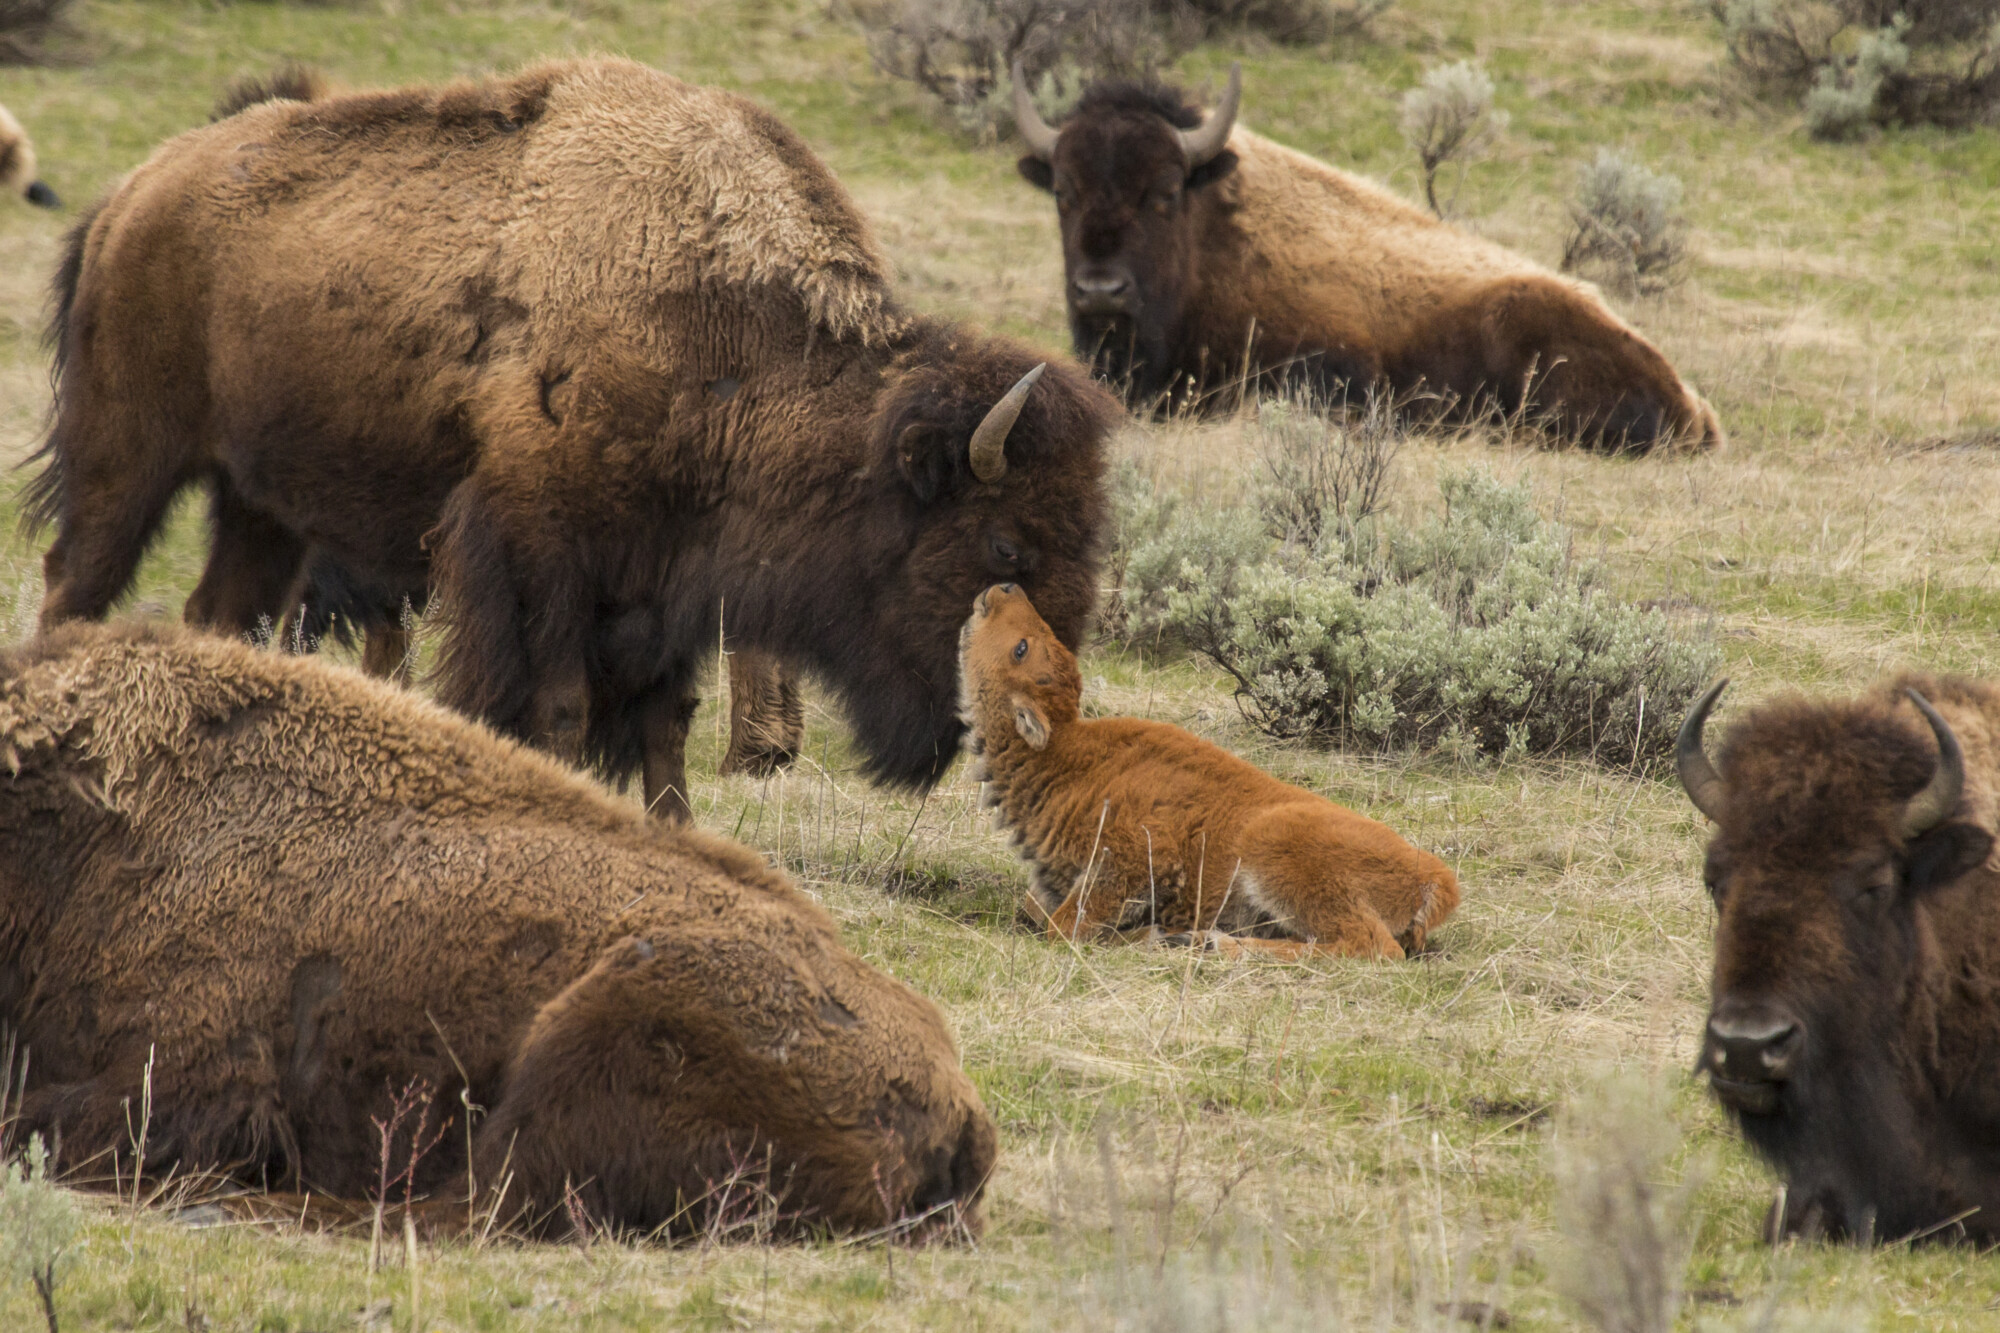 Newborn bison calf getting nuzzled by mom in Yellowstone National Park, Wyoming.